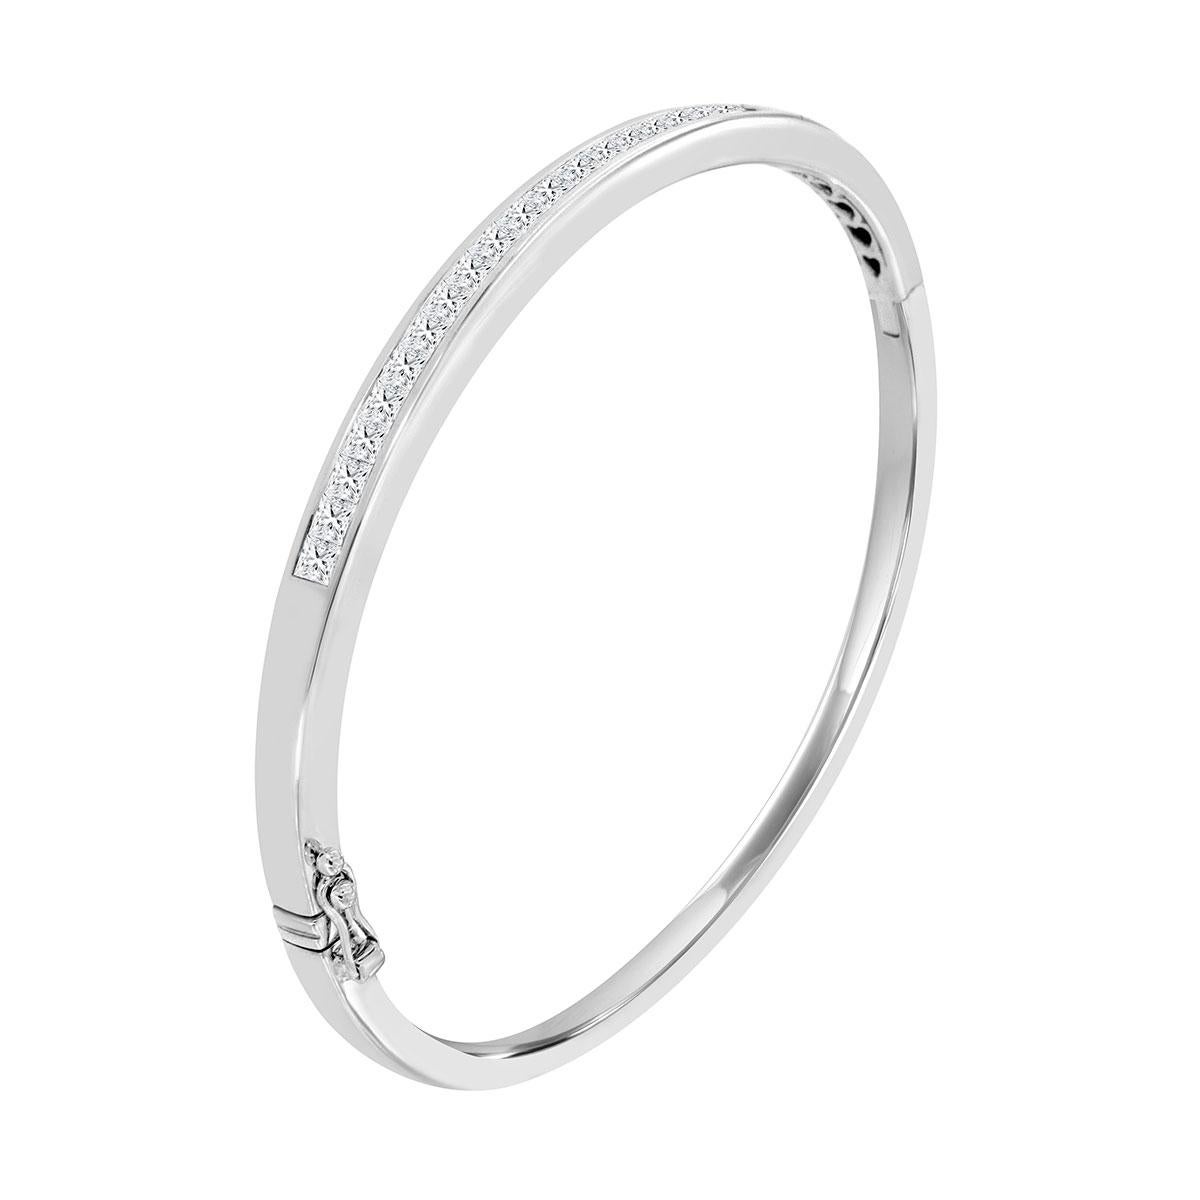 This classic bangle bracelet, highlighted by Princess Cut channel set diamonds in 18k white gold with a box clasp and a safety hinge.

Product details: 

Center Gemstone Type: NATURAL DIAMOND
Center Gemstone Color: WHITE
Center Gemstone Shape: